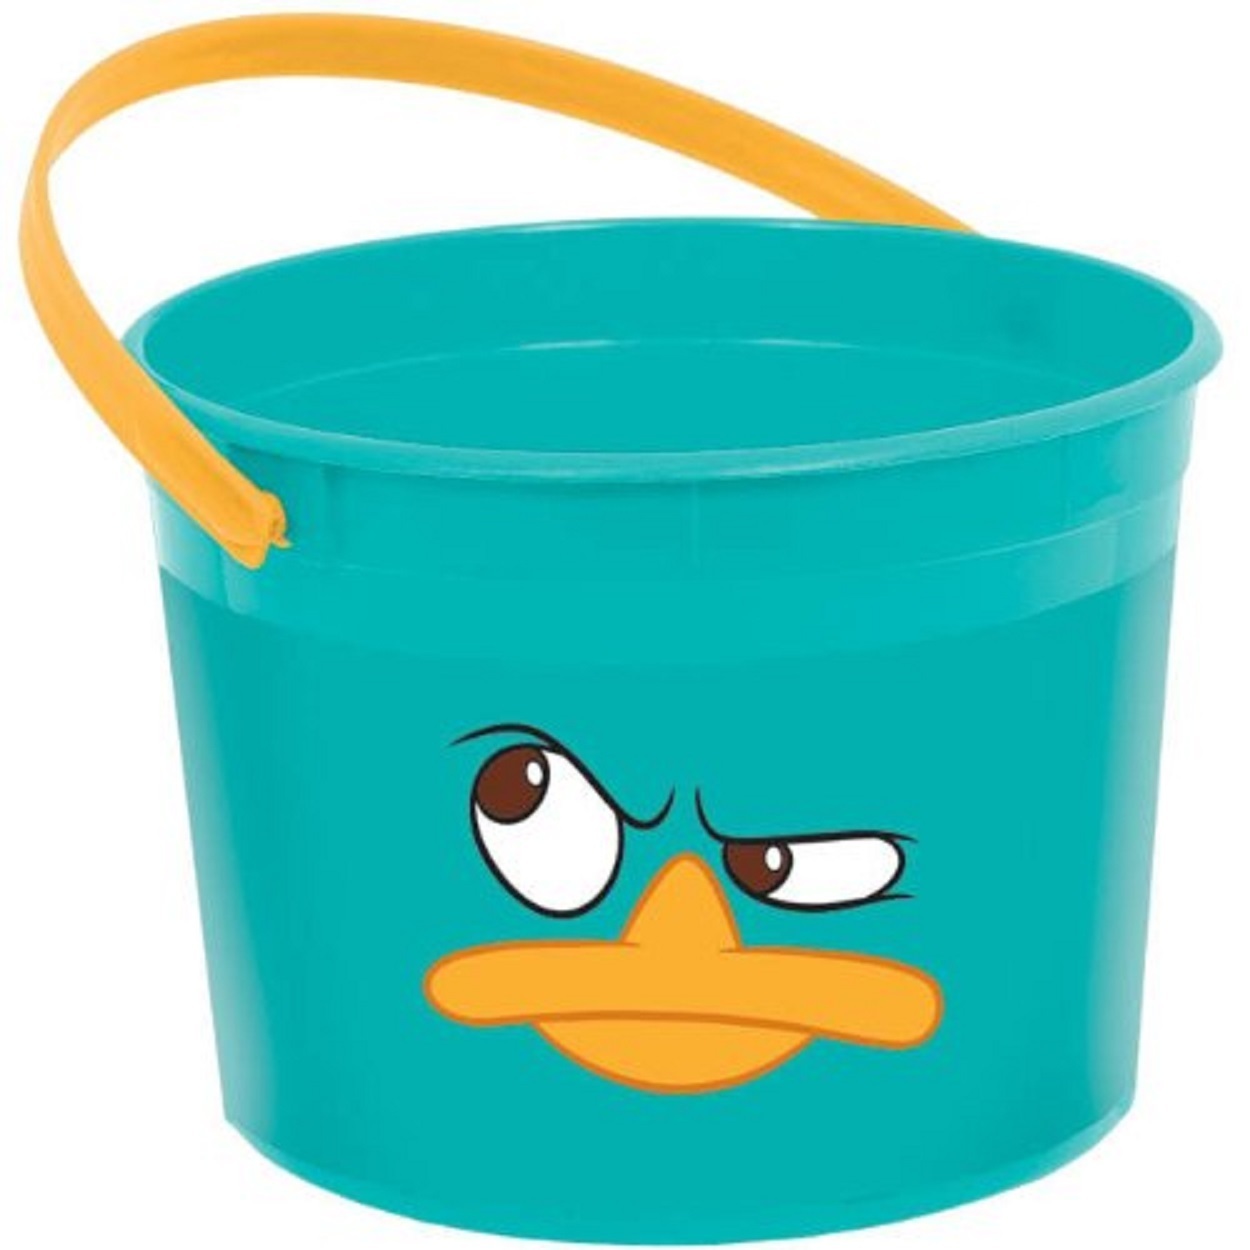 Disney Phineas and Ferb Agent P Perry Plastic Favor Bucket Container ( 1pc )